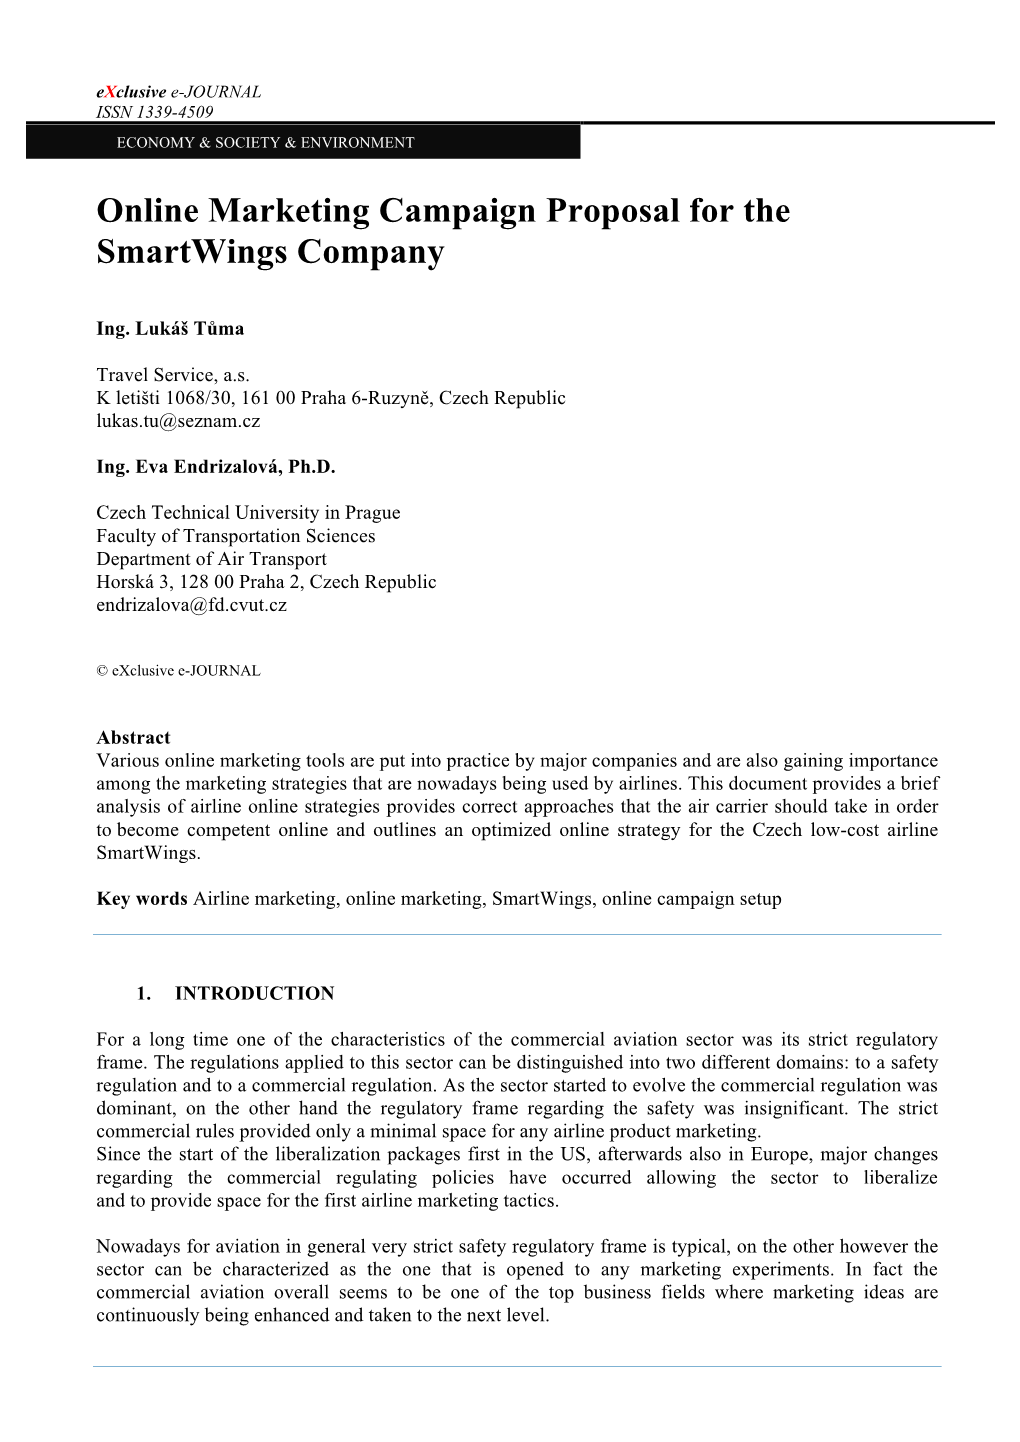 Online Marketing Campaign Proposal for the Smartwings Company